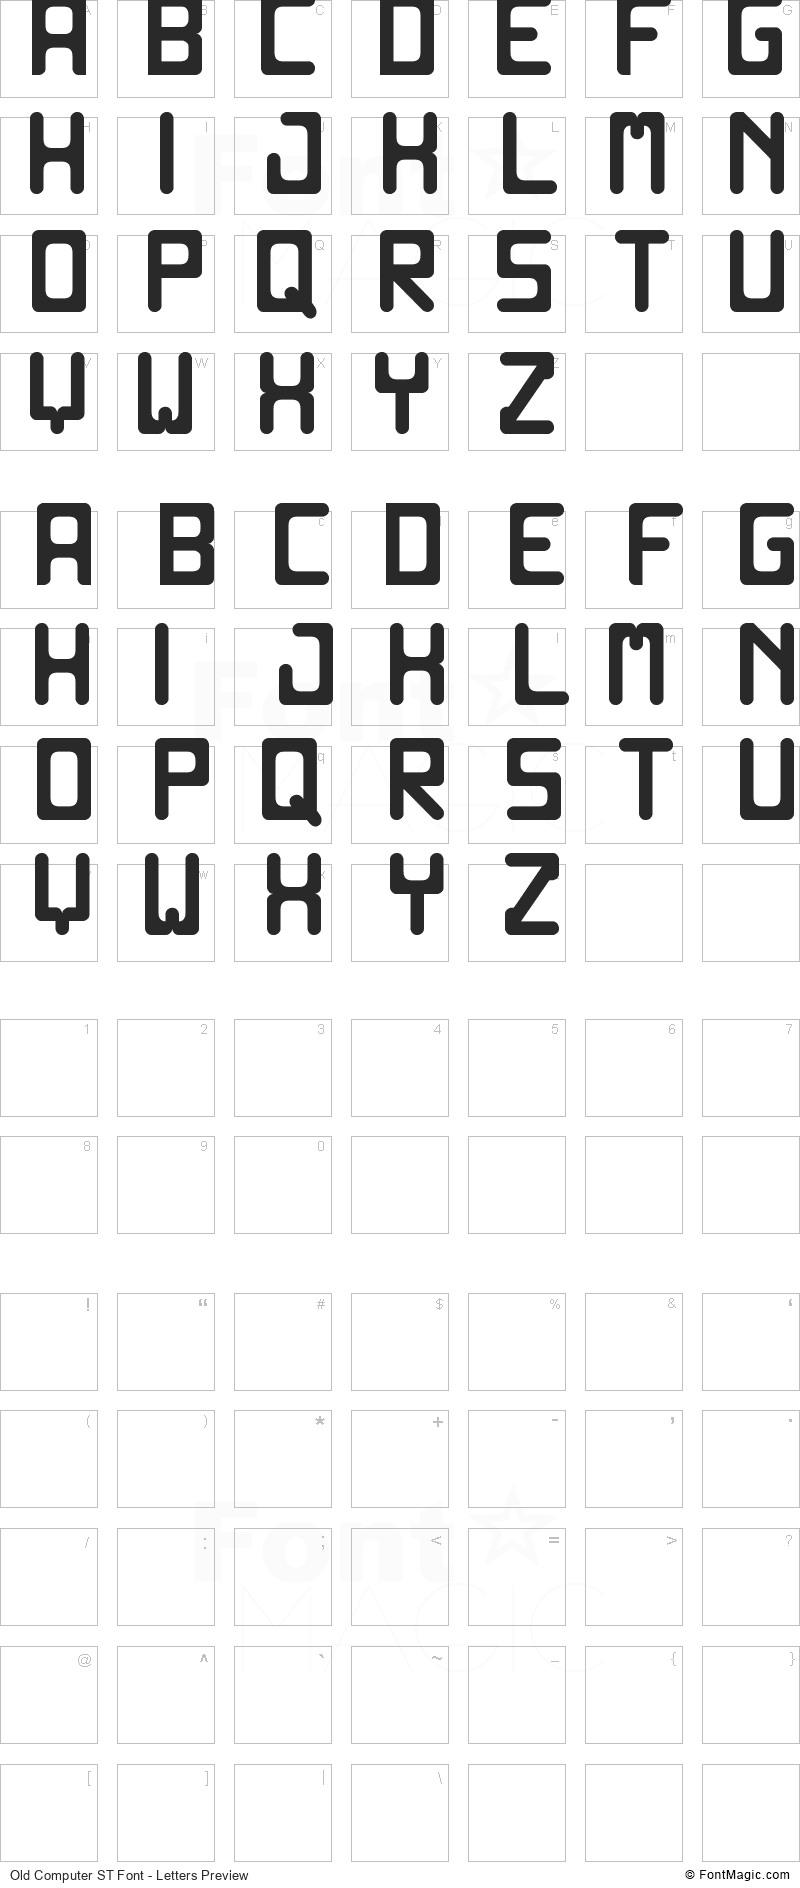 Old Computer ST Font - All Latters Preview Chart